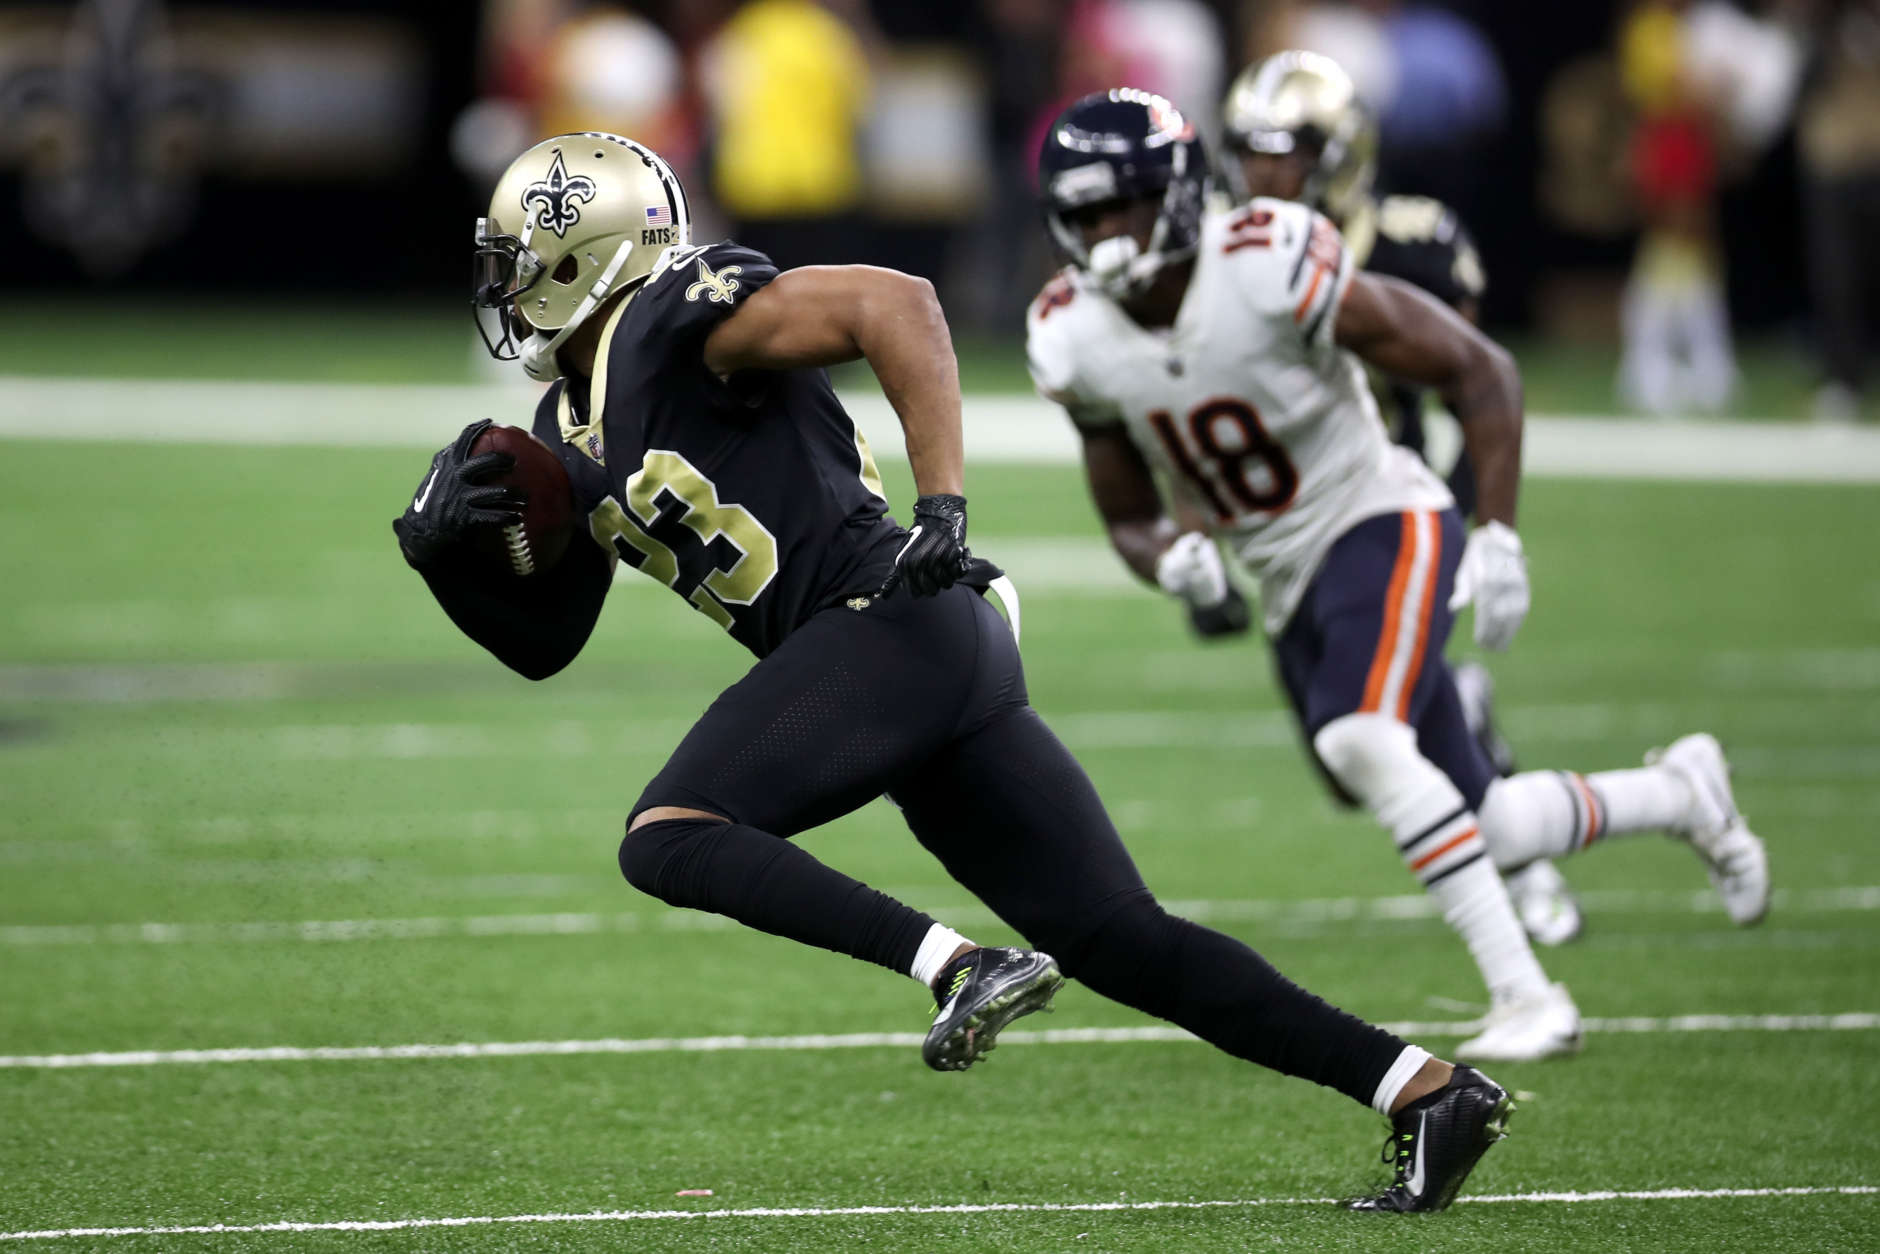 NEW ORLEANS, LA - OCTOBER 29:  Marshon Lattimore #23 of the New Orleans Saints intercepts the ball against the Chicago Bears at the Mercedes-Benz Superdome on October 29, 2017 in New Orleans, Louisiana.  (Photo by Chris Graythen/Getty Images)